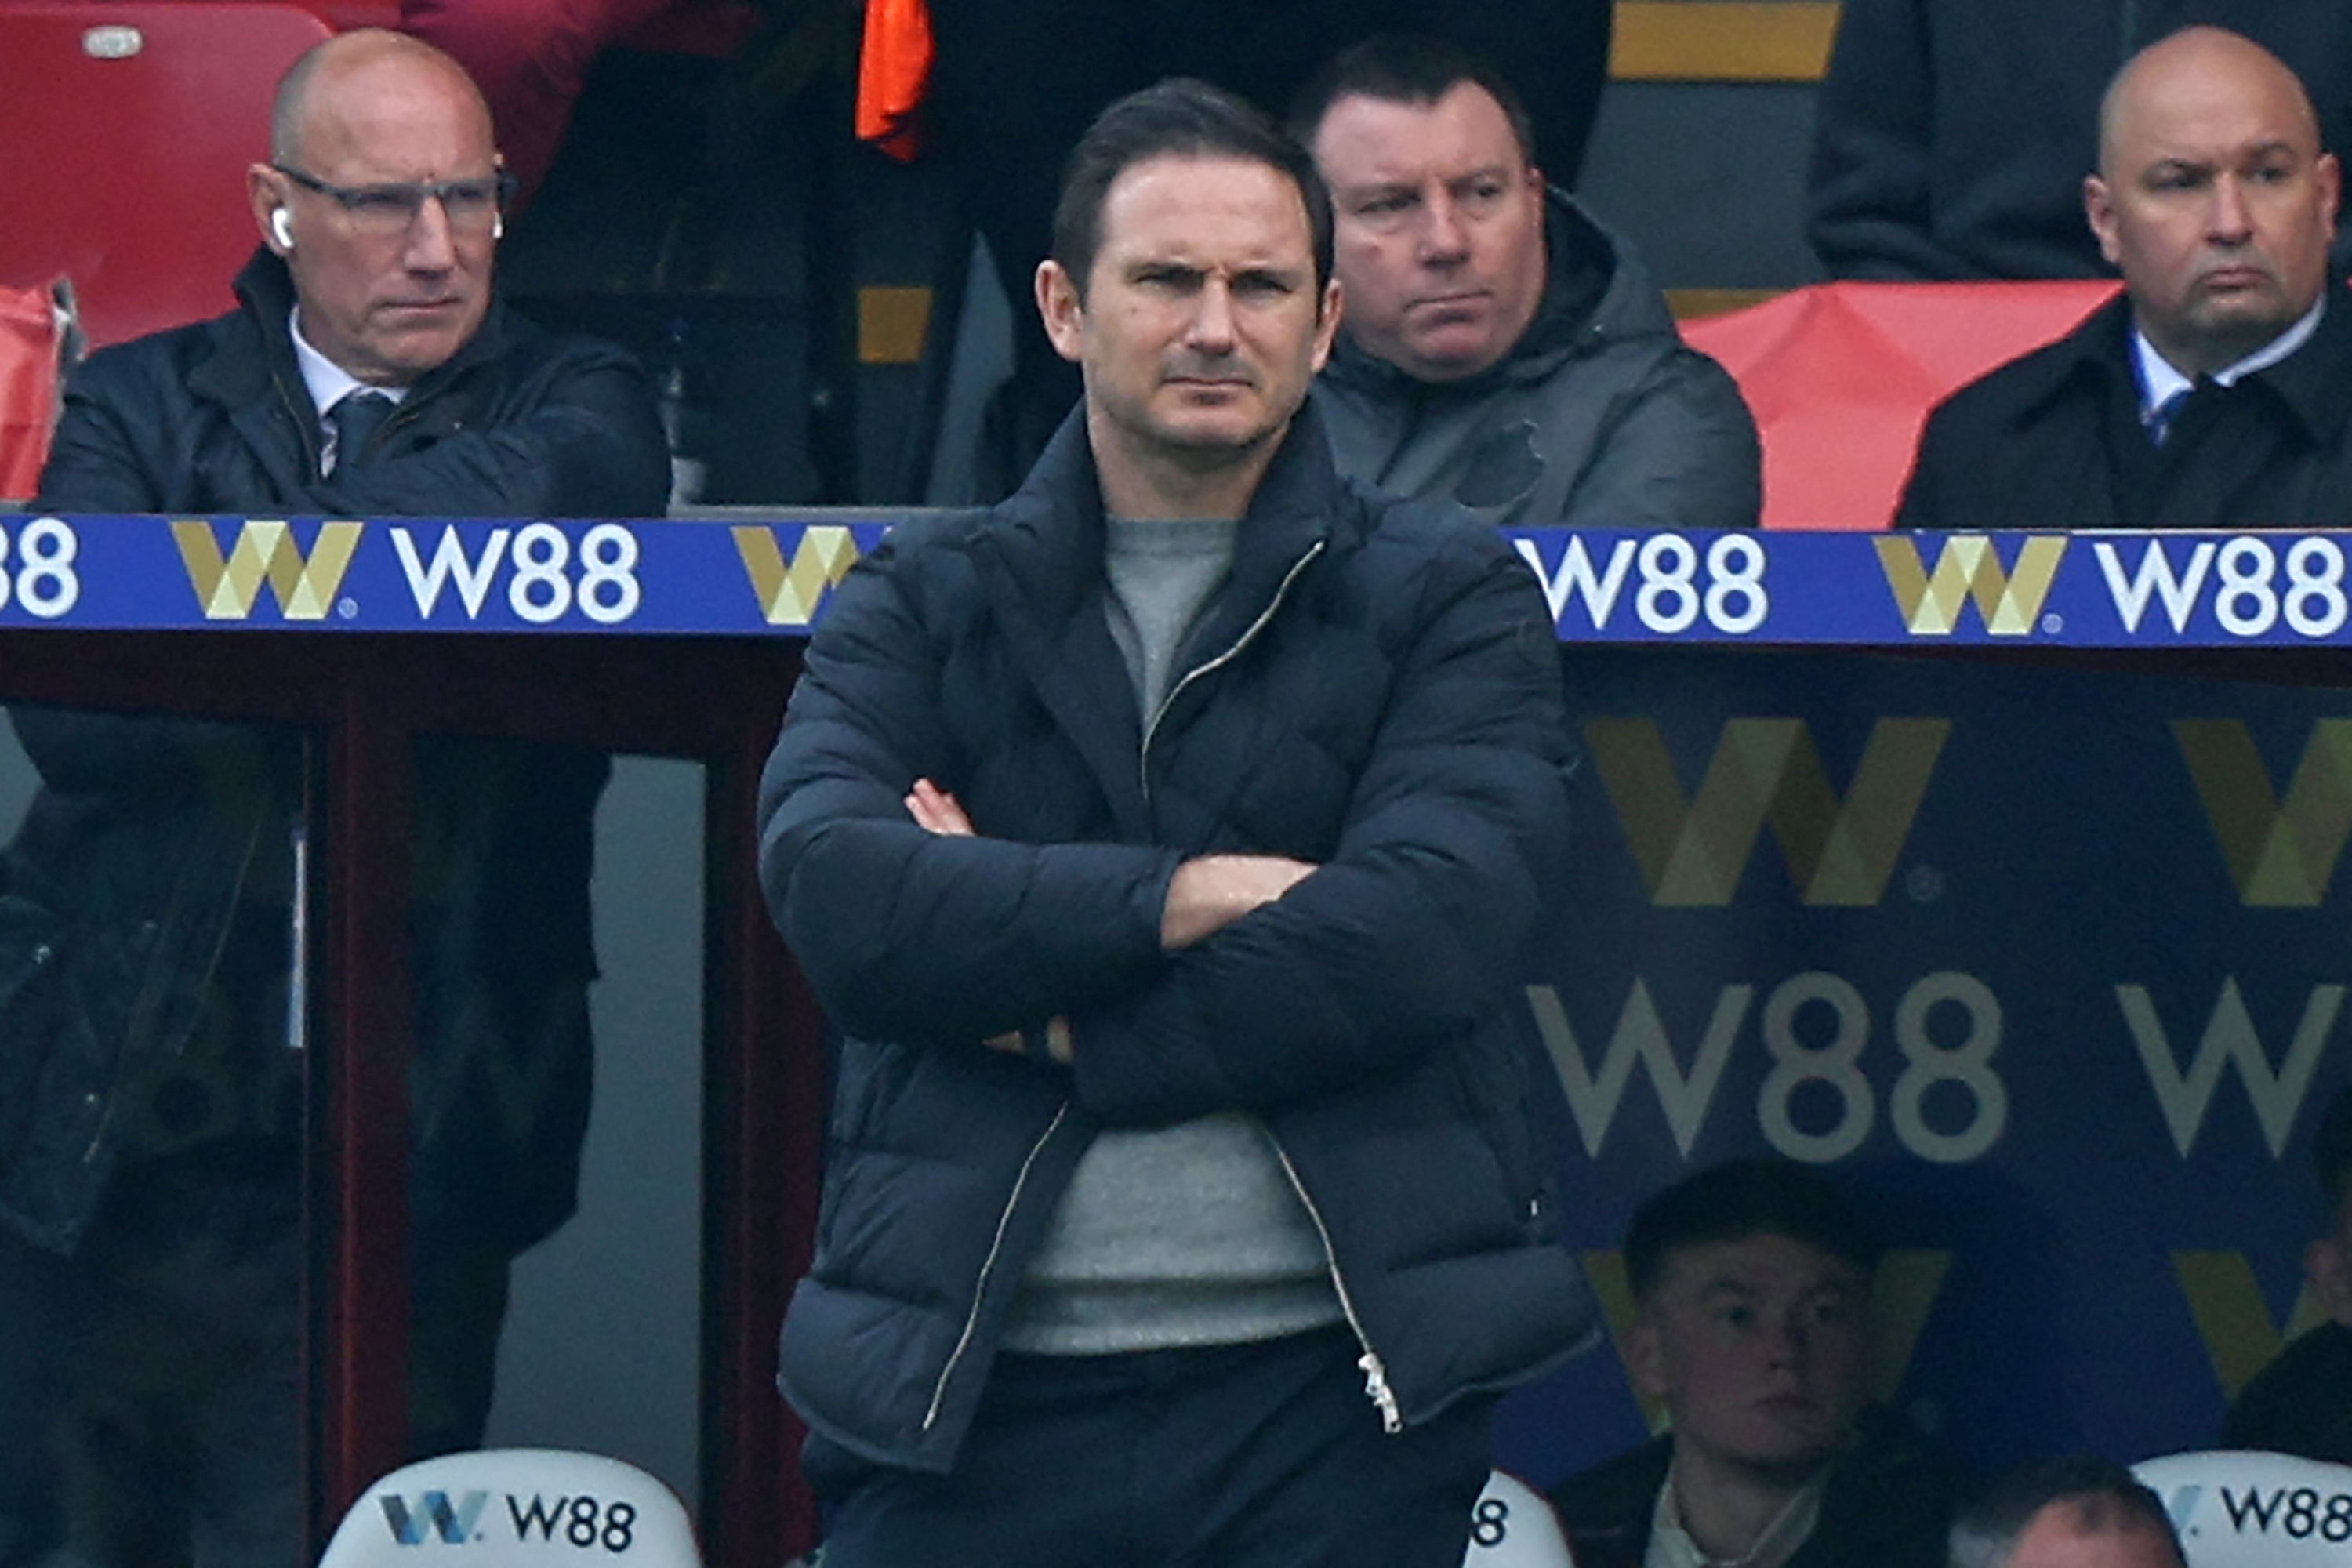 Frank Lampard’s Everton were beaten 4-0 by Crystal Palace in their FA Cup quarter-final